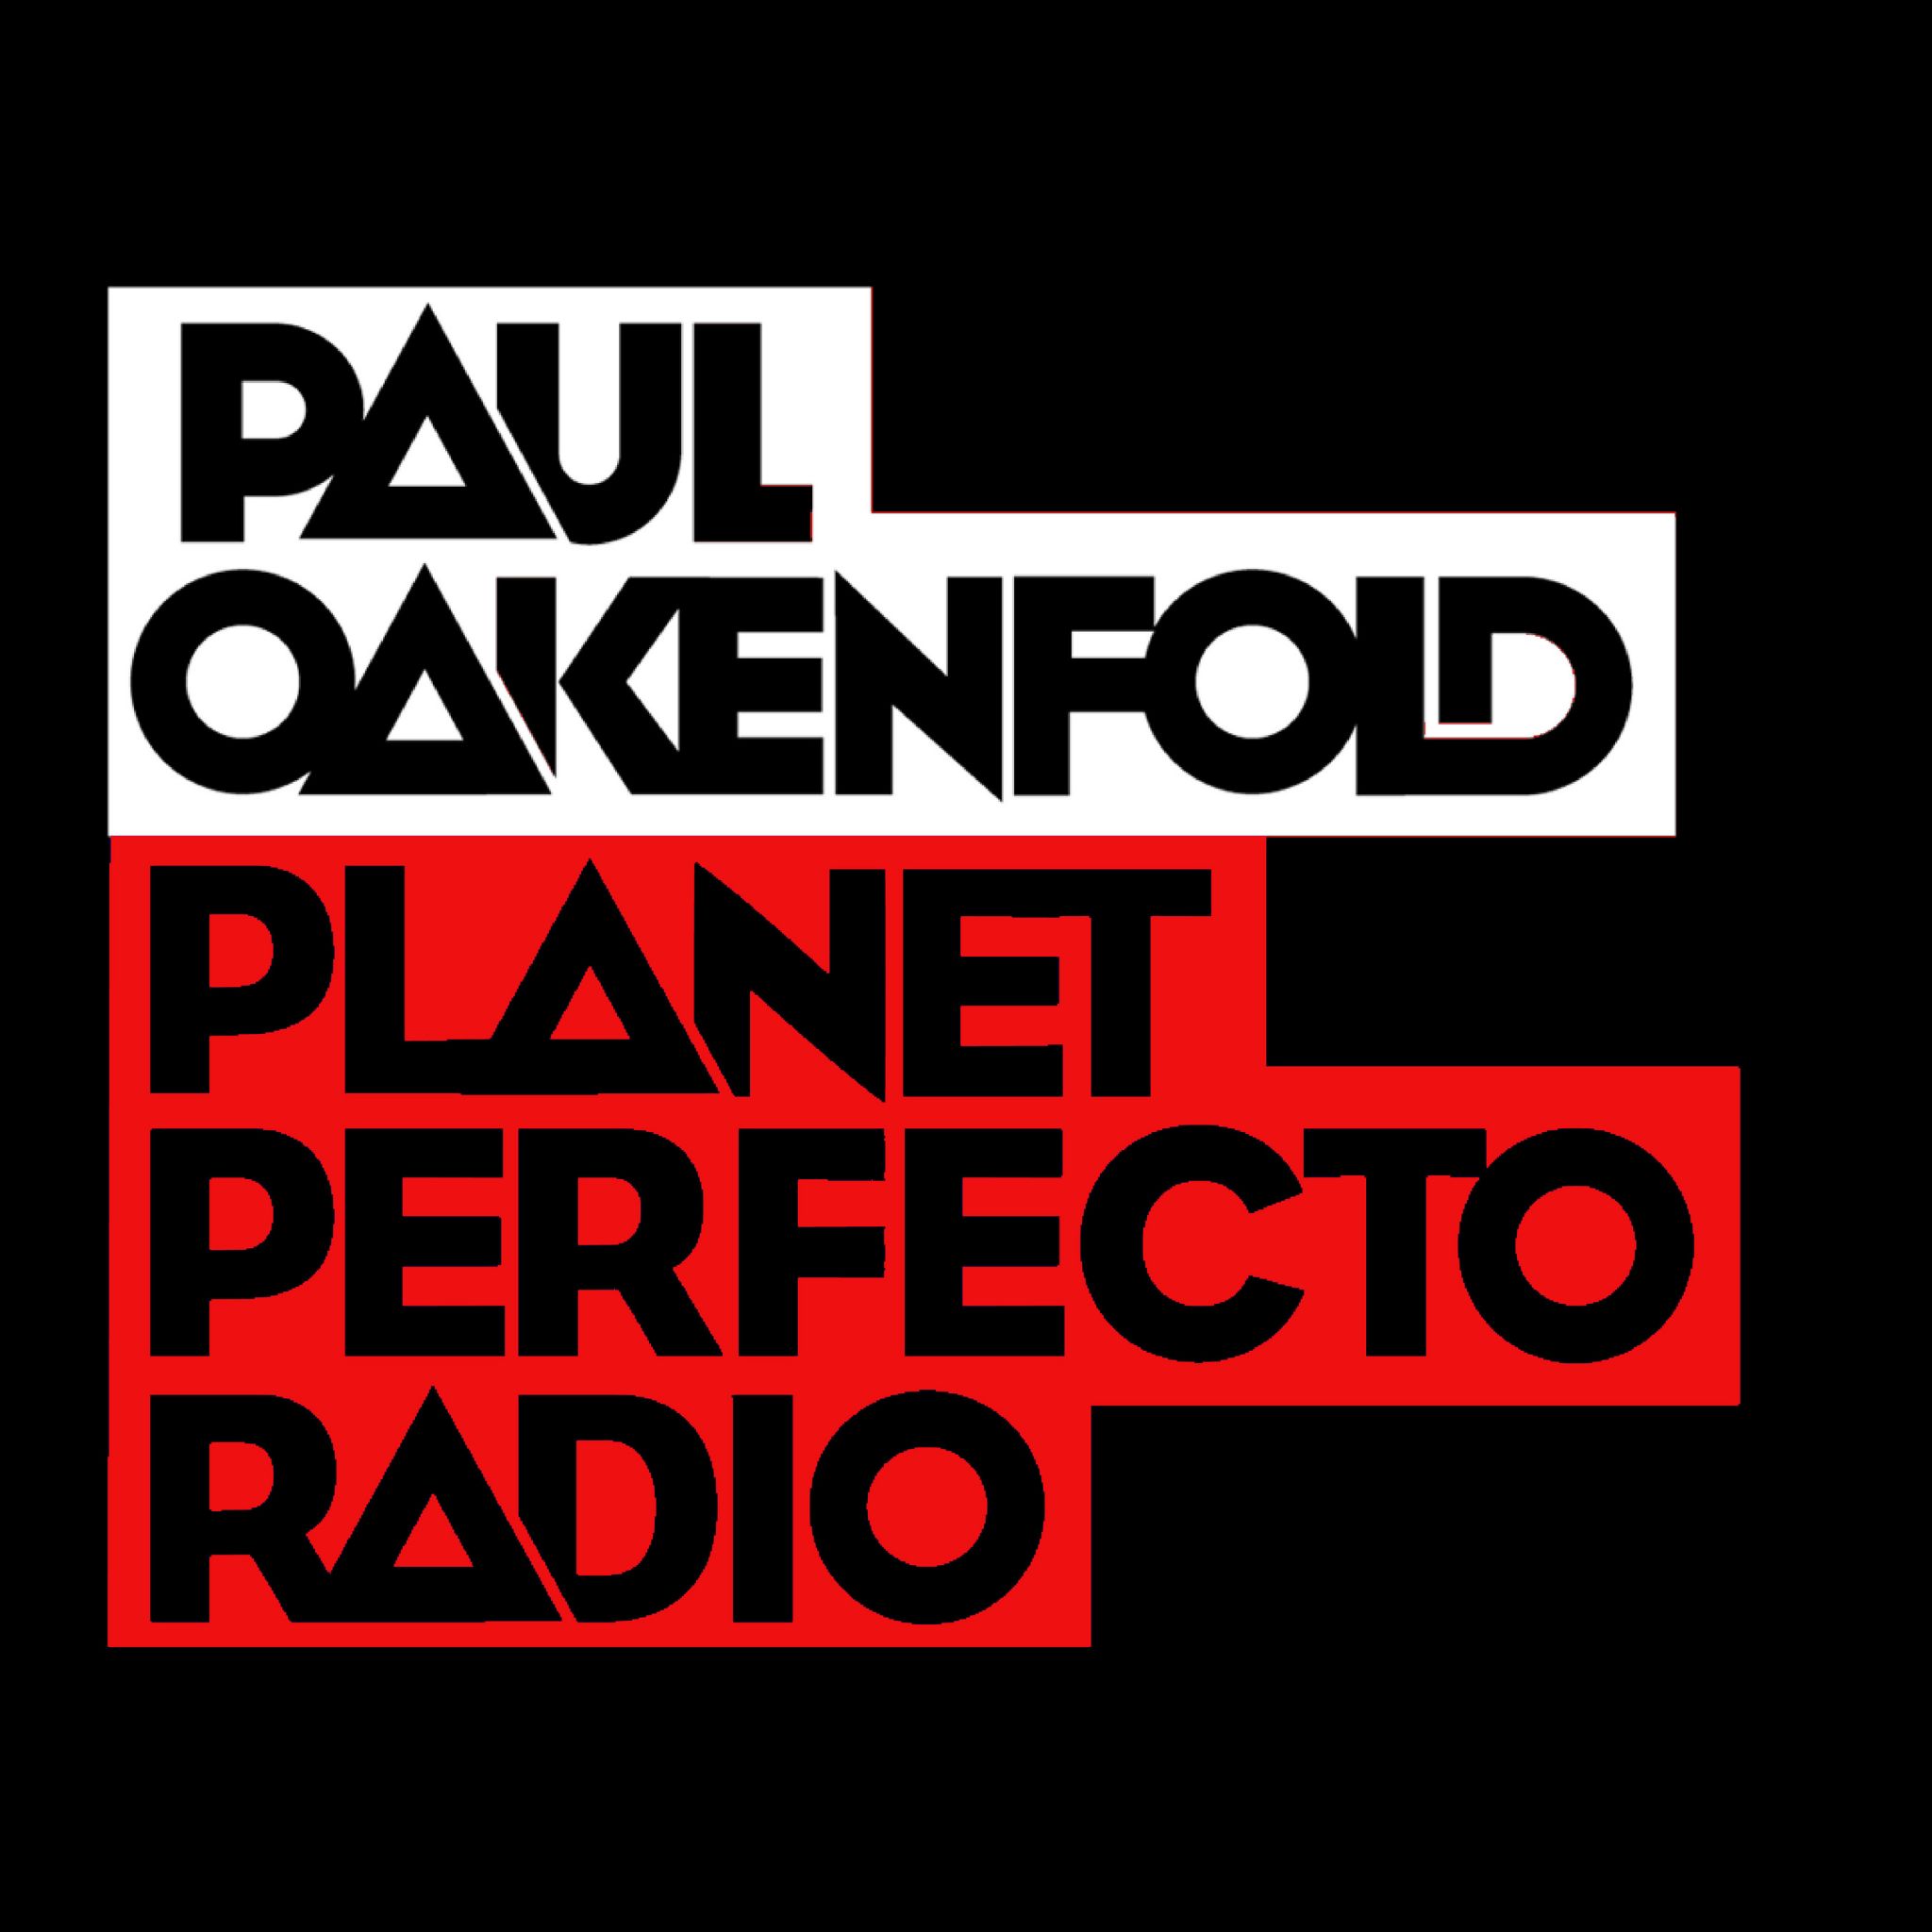 Planet Perfecto 590 ft. Paul Oakenfold